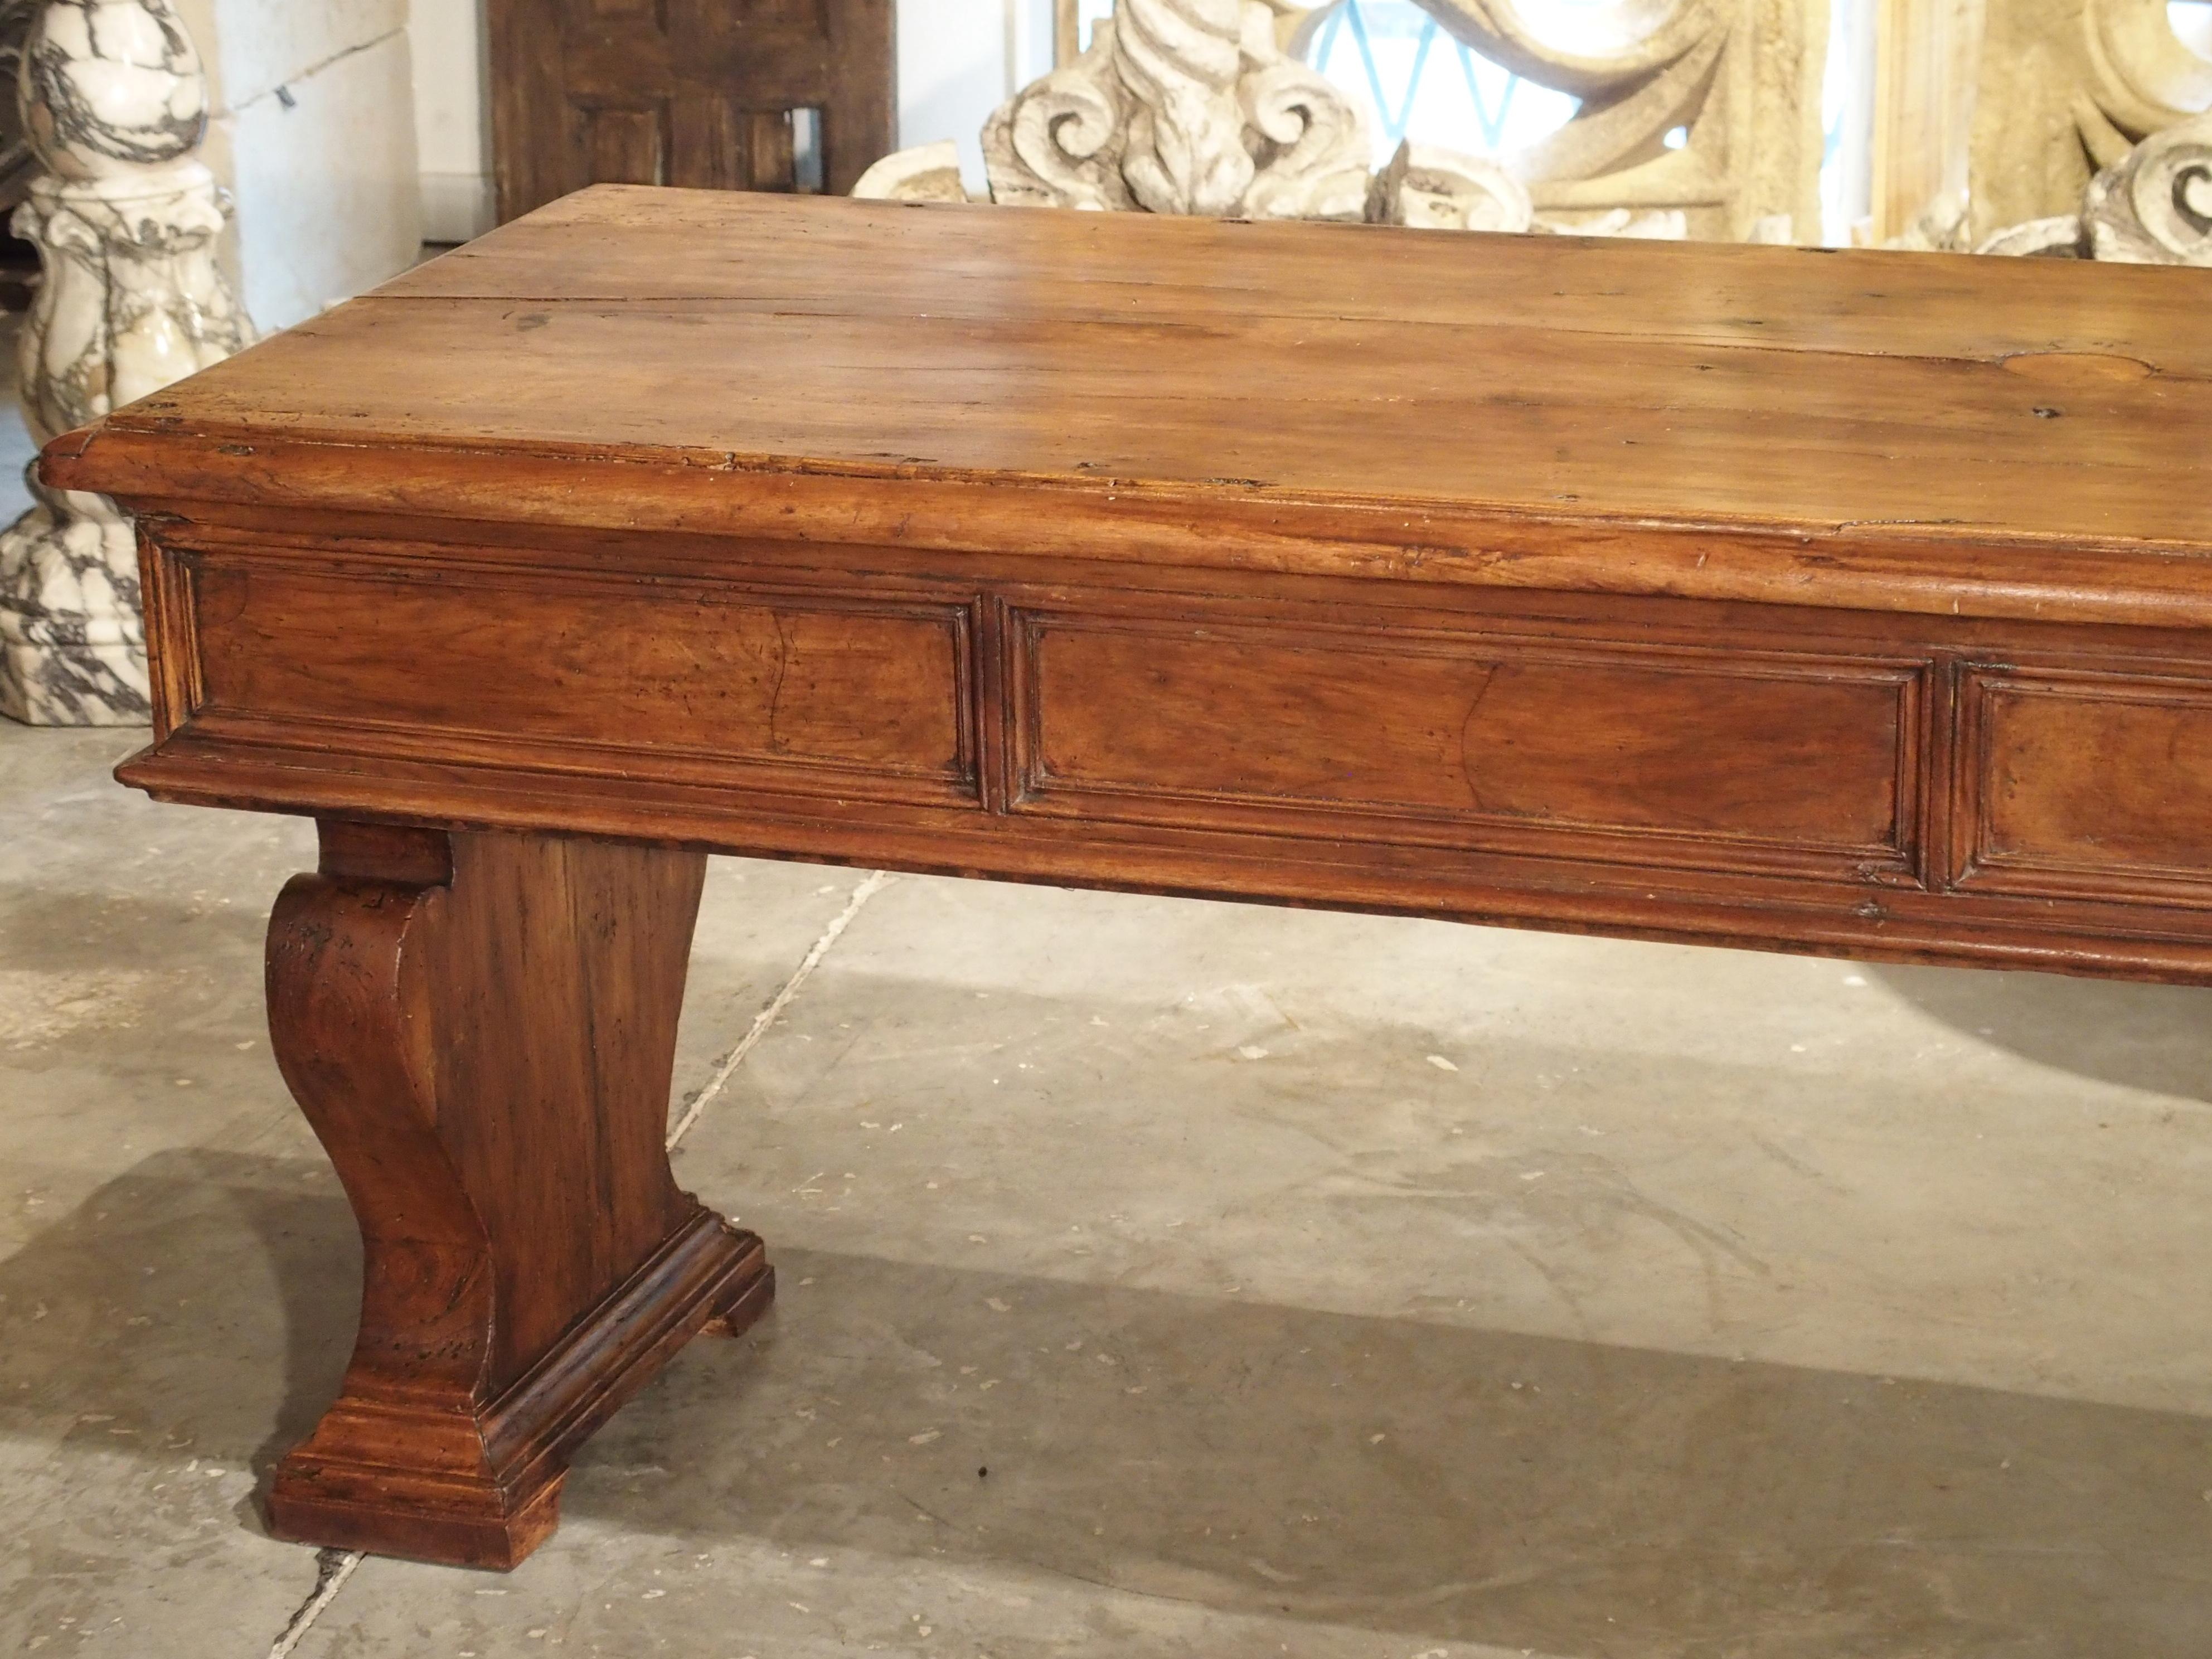 This fabulous walnut wood refectory table from Italy has some beautiful graining. Look at some of the photos of the top plank to see the interesting color and patterns. Refectory table tops were often made from one solid plank of wood, at the most